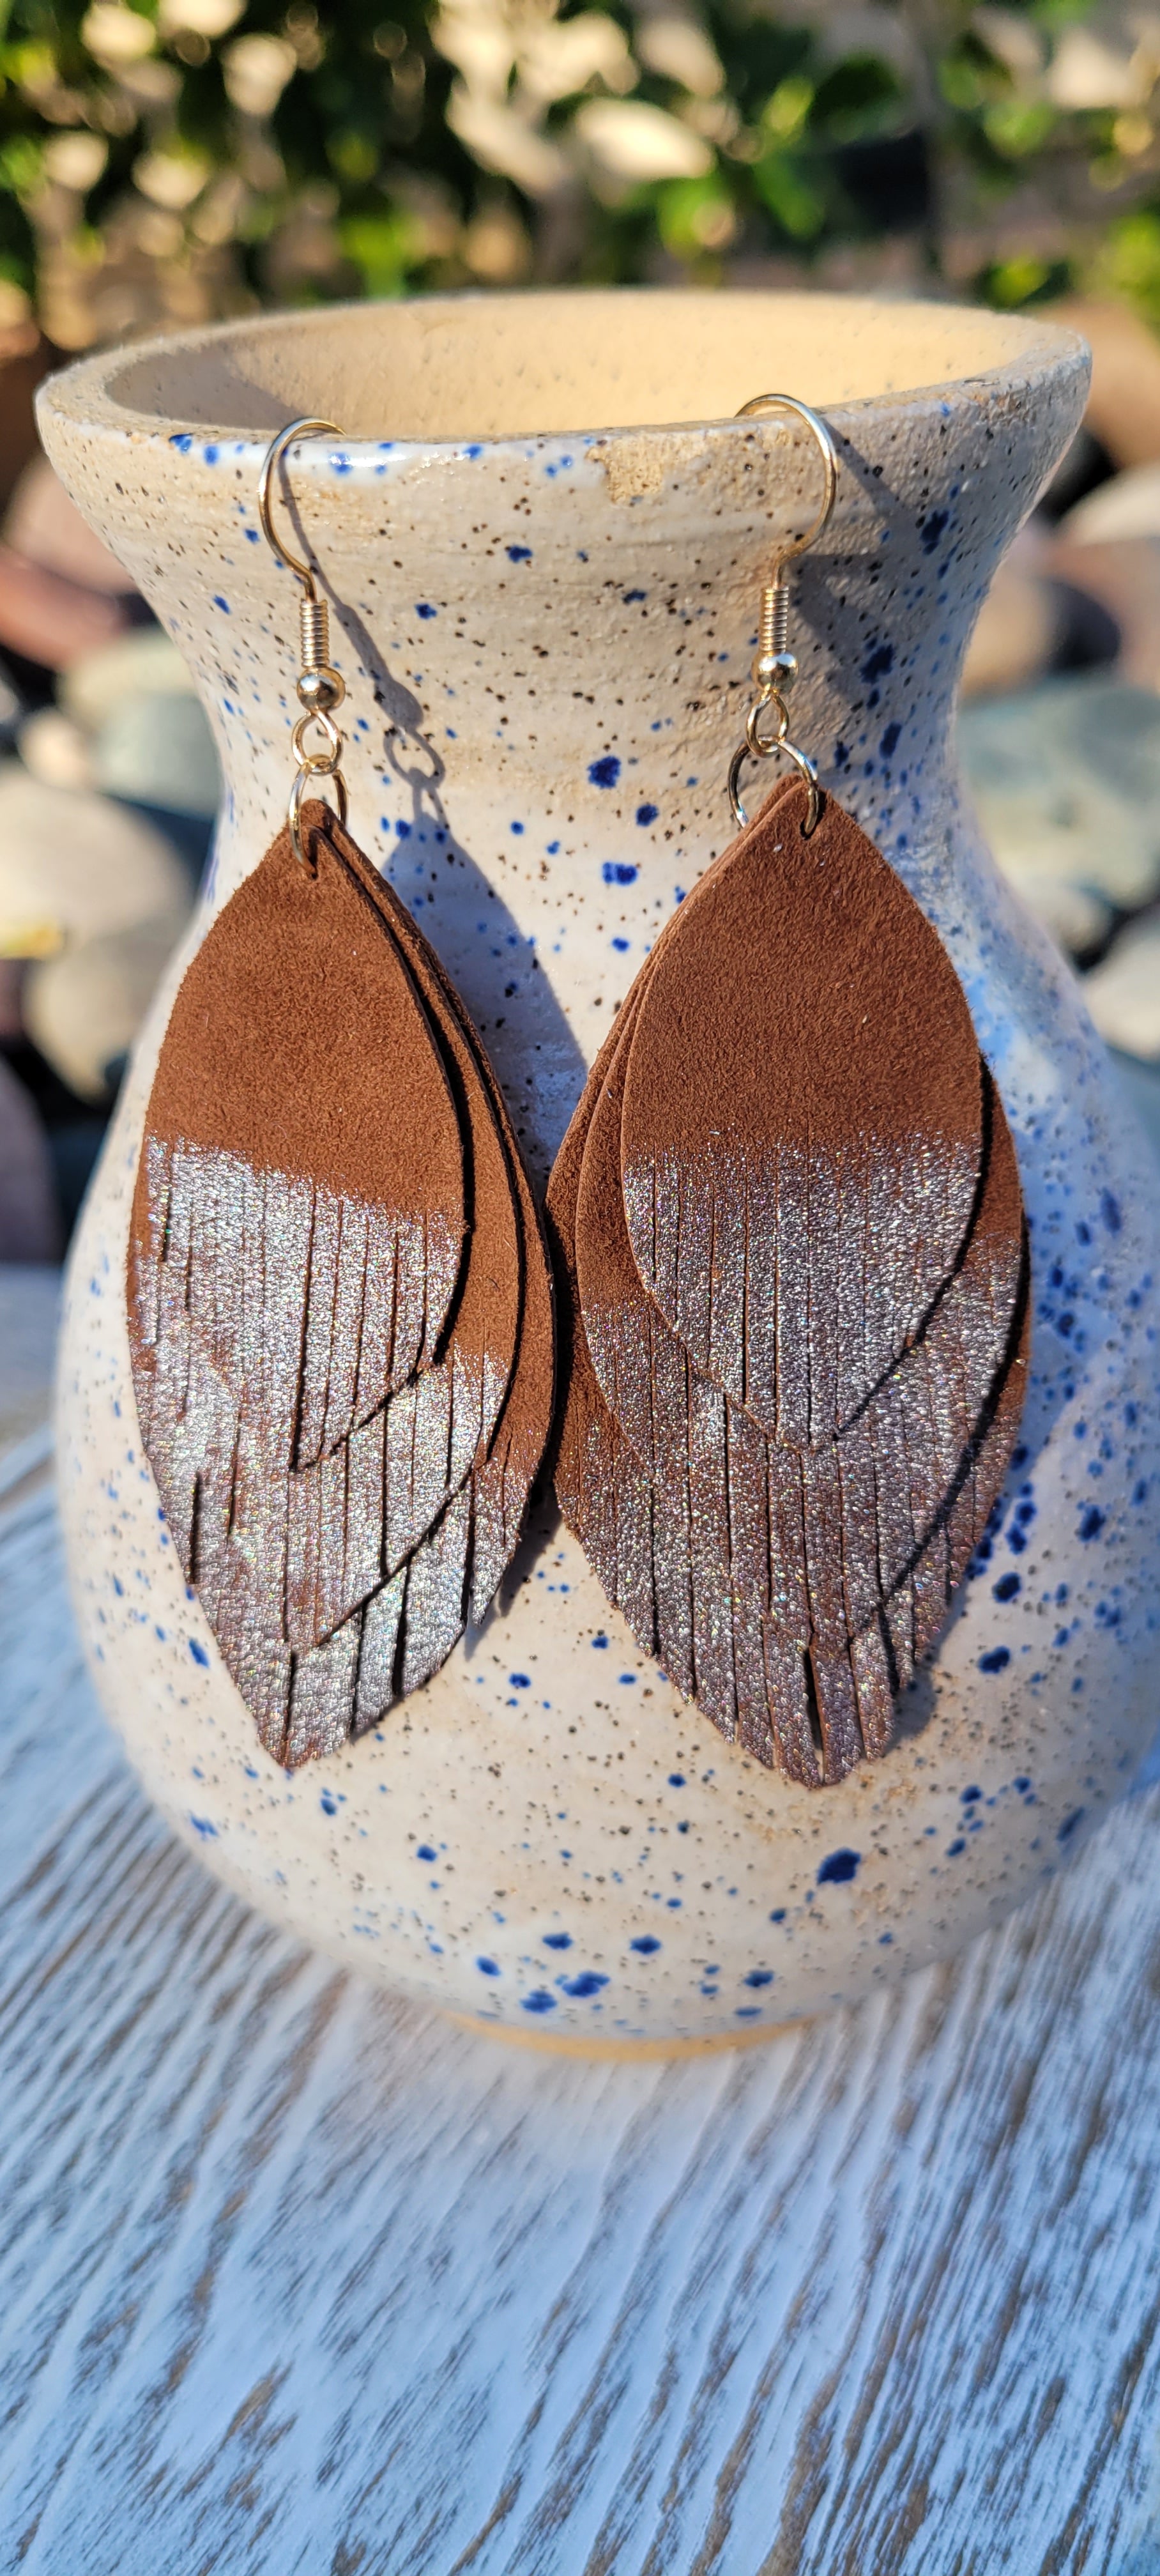 Marquise shape Genuine leather Brown leather with dipped silver fringes Brushed gold fish hook dangle earrings Rubber earring back Whether you want to be on the wild side or classy this earring set it will add a fun touch to your outfit